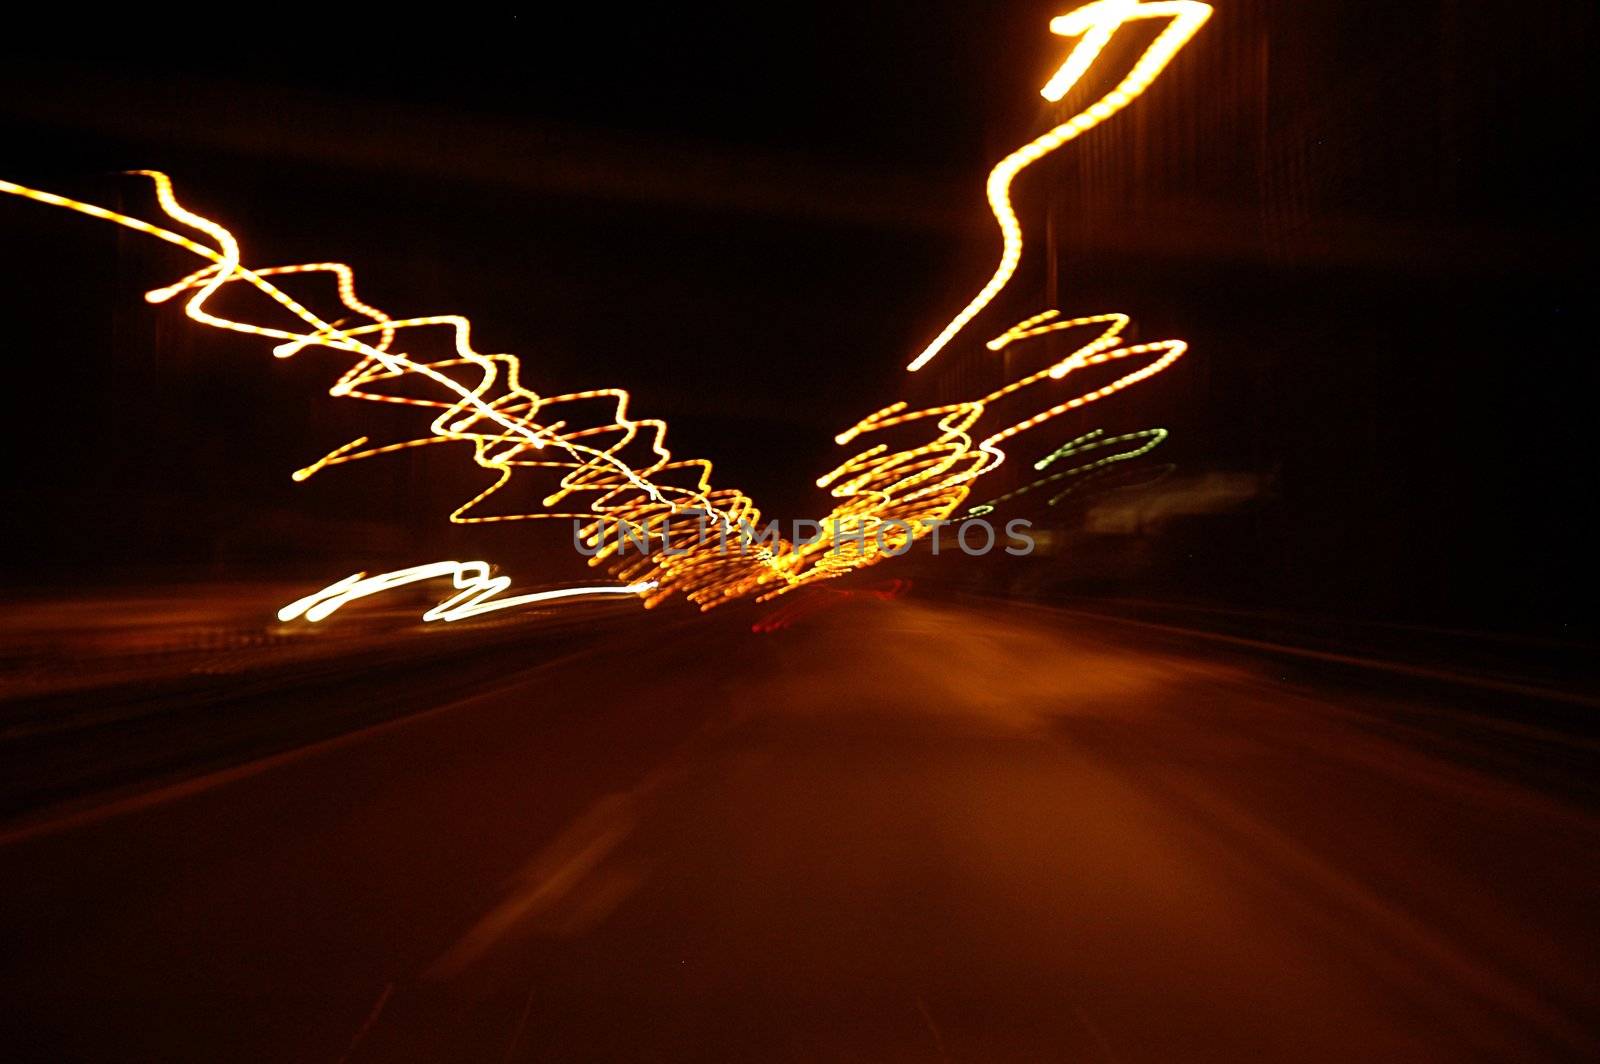 Light painting while driving at night